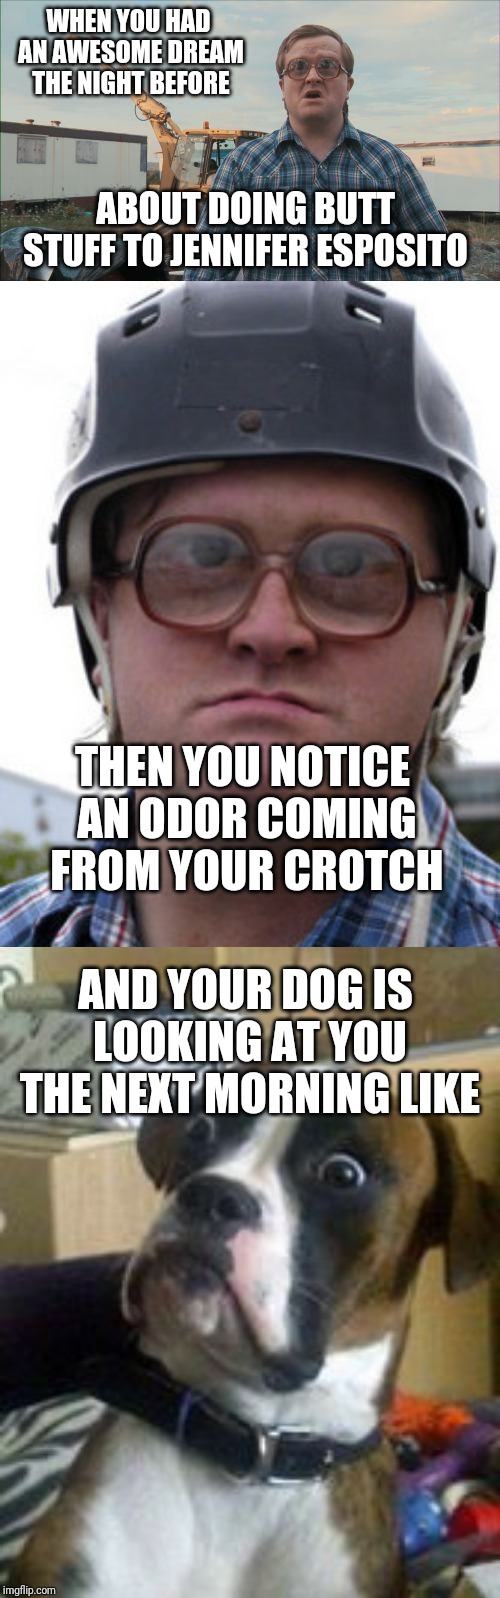 WHEN YOU HAD AN AWESOME DREAM THE NIGHT BEFORE; ABOUT DOING BUTT STUFF TO JENNIFER ESPOSITO; THEN YOU NOTICE AN ODOR COMING FROM YOUR CROTCH; AND YOUR DOG IS LOOKING AT YOU THE NEXT MORNING LIKE | image tagged in memes,trailer park boys bubbles,dogs,bubbles trailer park boys | made w/ Imgflip meme maker